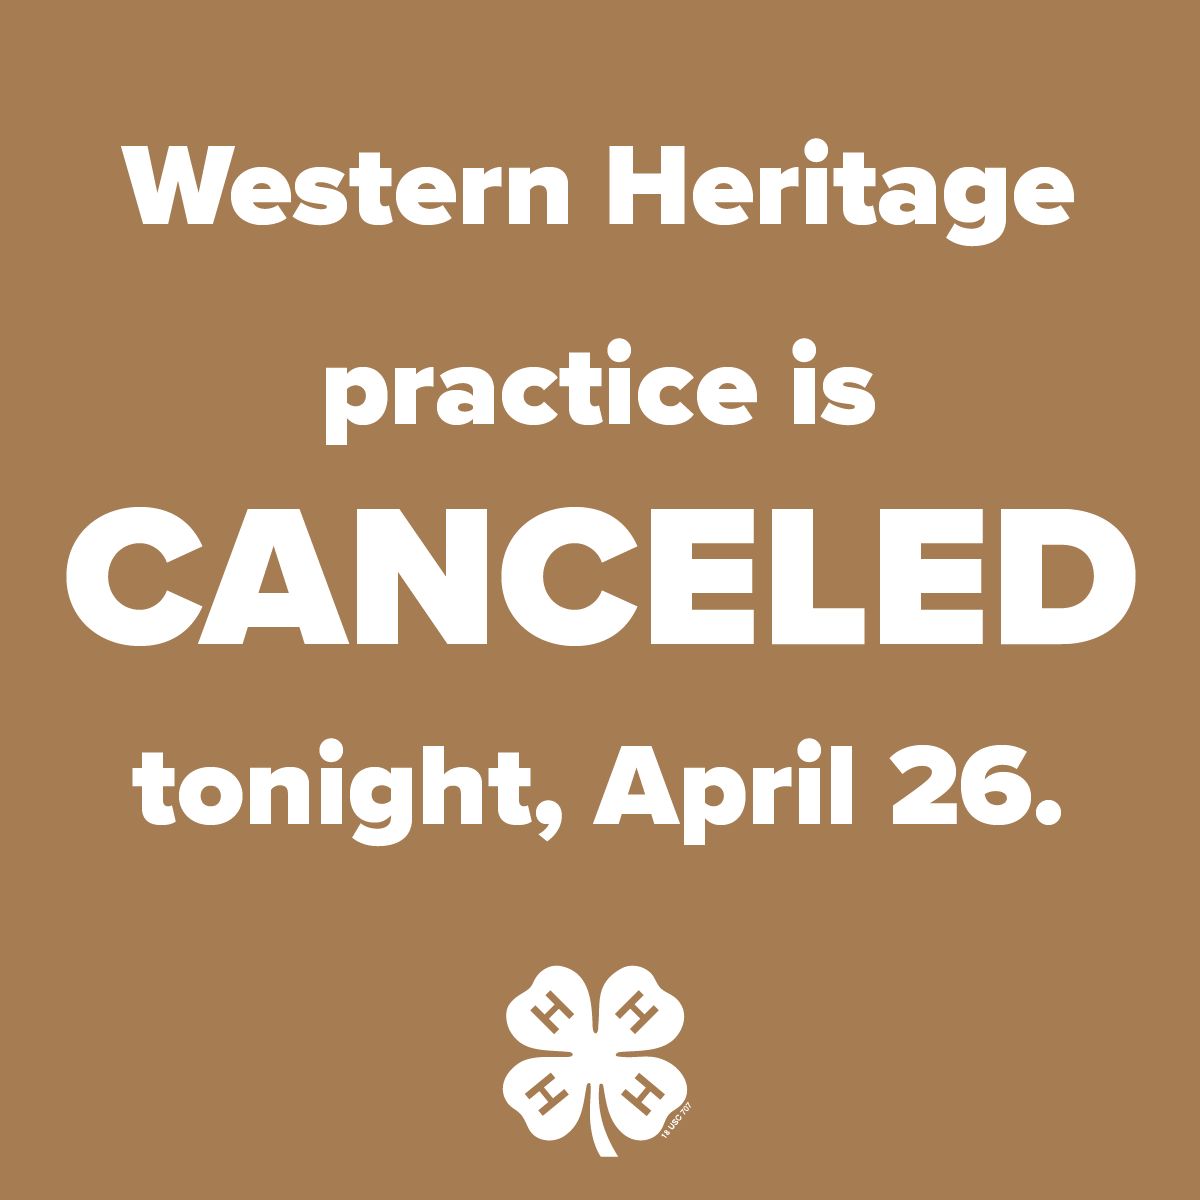 Western Heritage practice on Friday, April 26 is CANCELED due to a family emergency as well as the weather.

#4h #4hshootingsports #shootingsports #lc4hss #larimer4h #colorado4h #colorado4hshootingsports #4hwesternheritage #cancellation